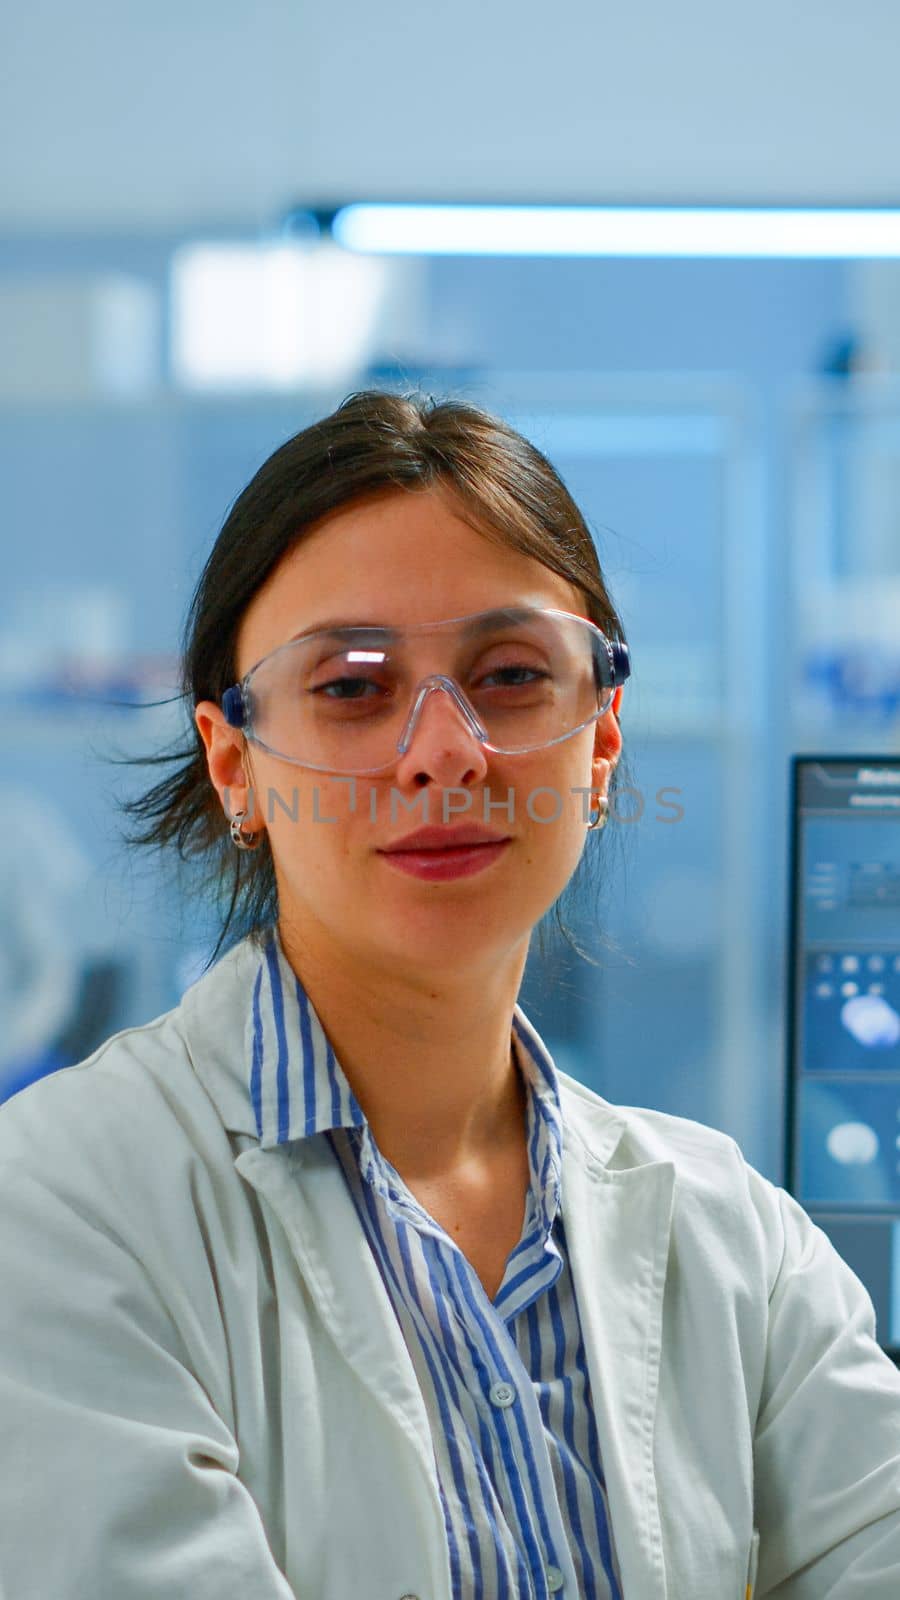 Chemist with lab coat sitting in laboratory looking at camera smiling by DCStudio